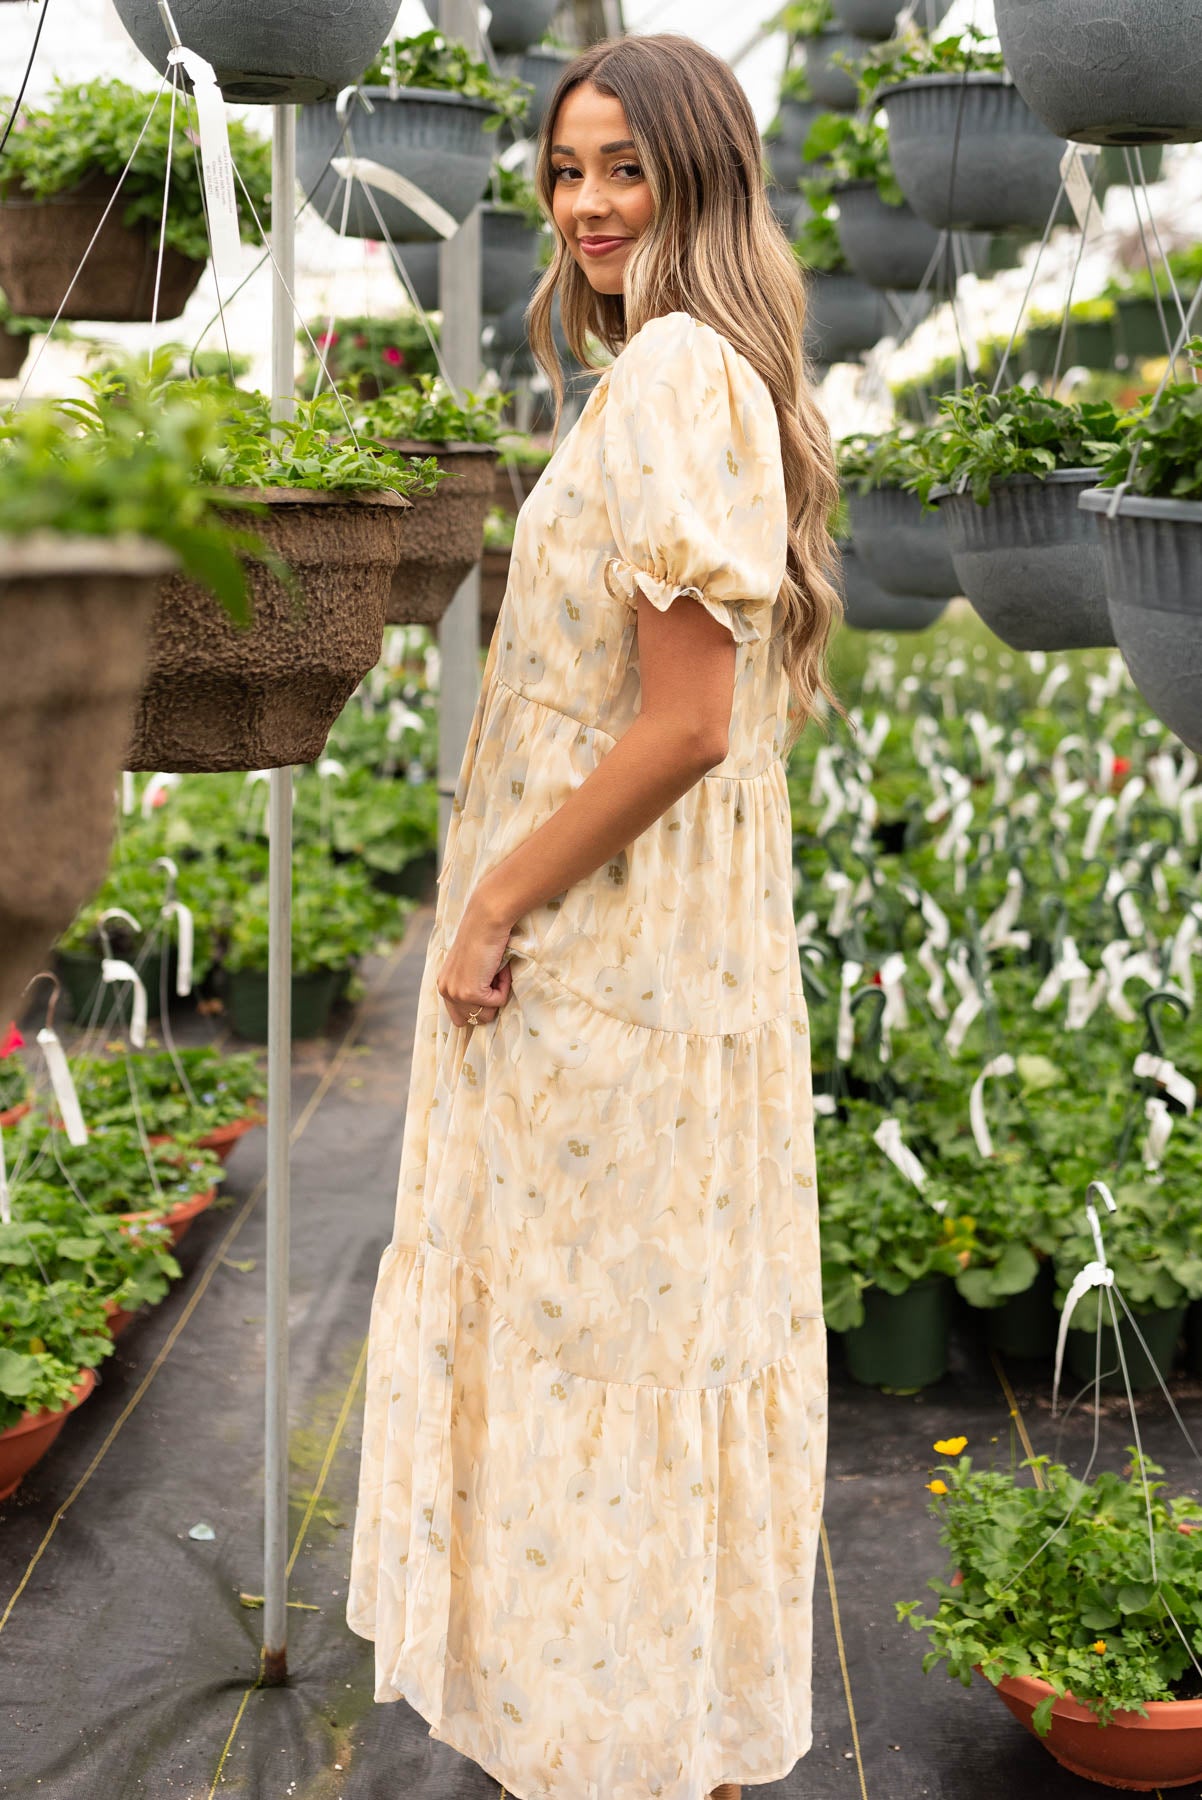 Side view of the tan pattern tiered dress with a floral pattern